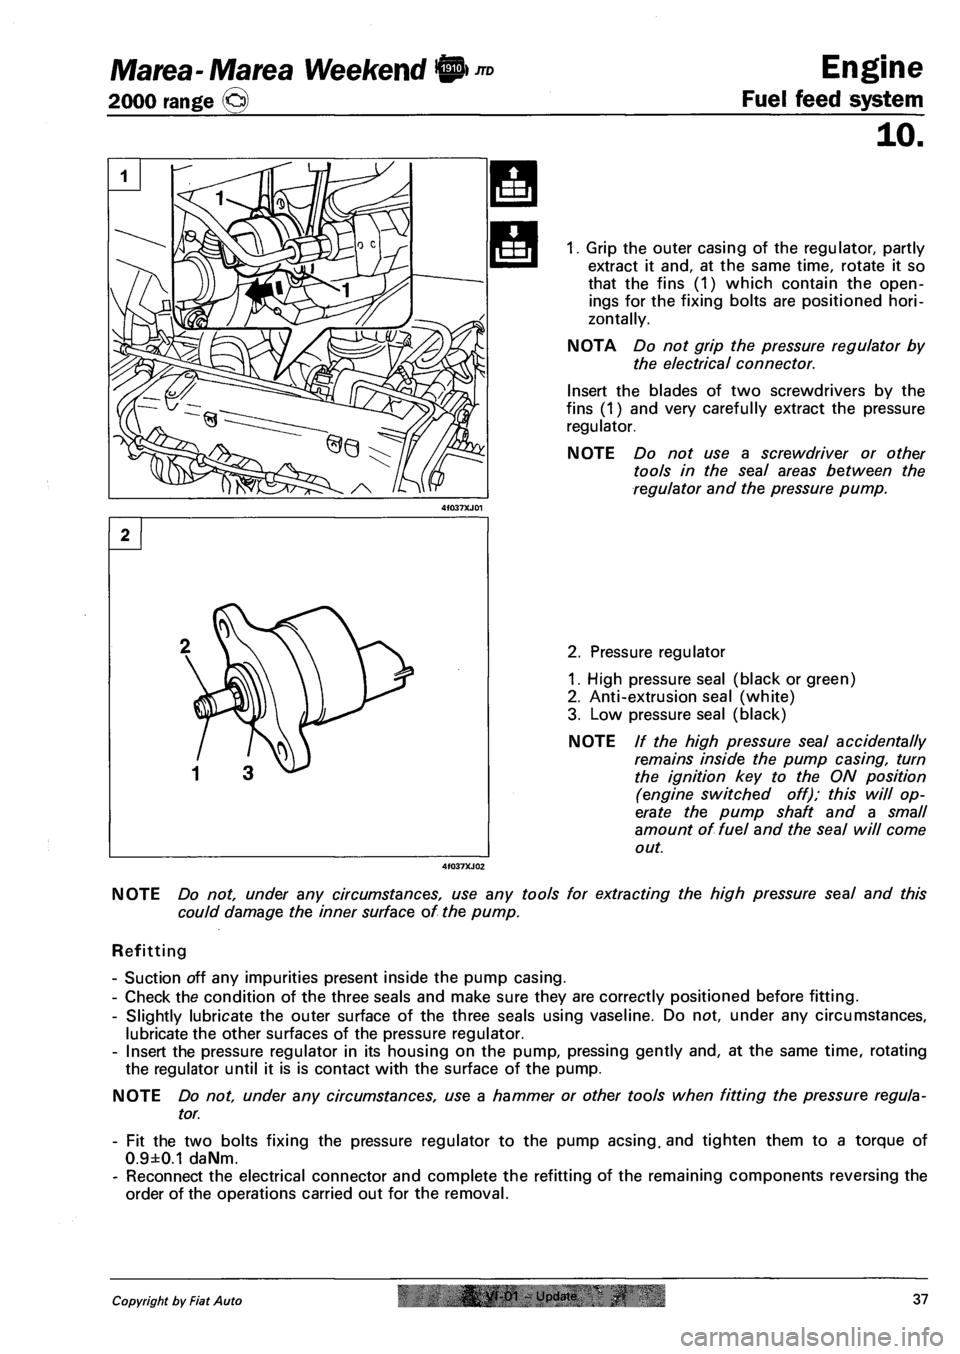 FIAT MAREA 2000 1.G Owners Guide Marea-Marea Weekend H nD Engine 
2000 range (Q) Fuel feed system 
10. 
1. Grip the outer casing of the regulator, partly 
extract it and, at the same time, rotate it so 
that the fins (1) which contai